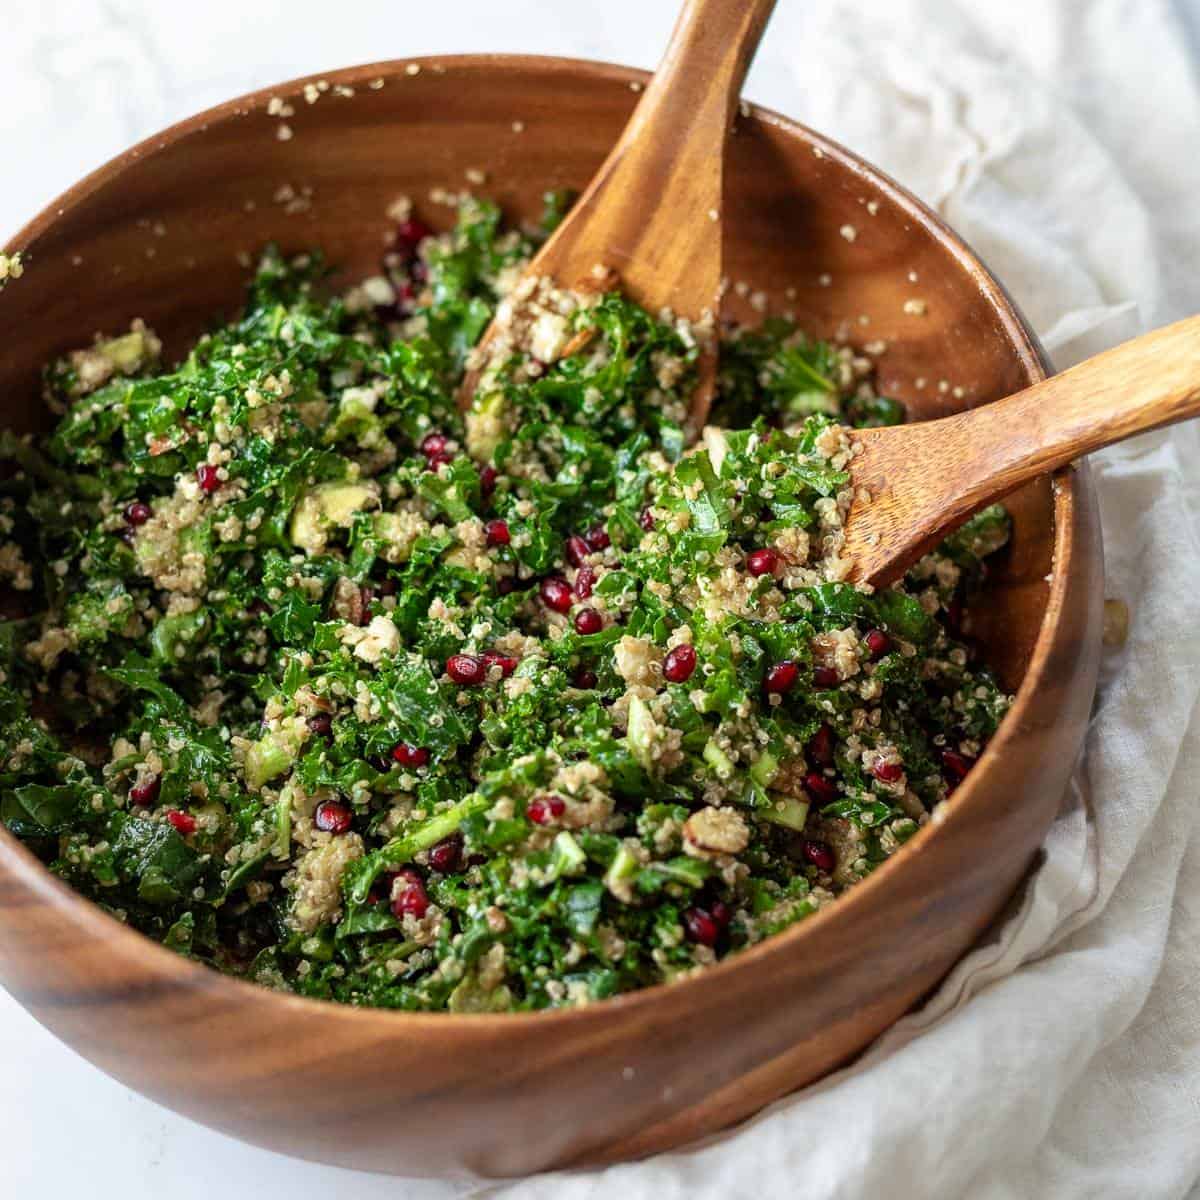 Tossed kale salad with pomegranates and quinoa in a wood bowl.